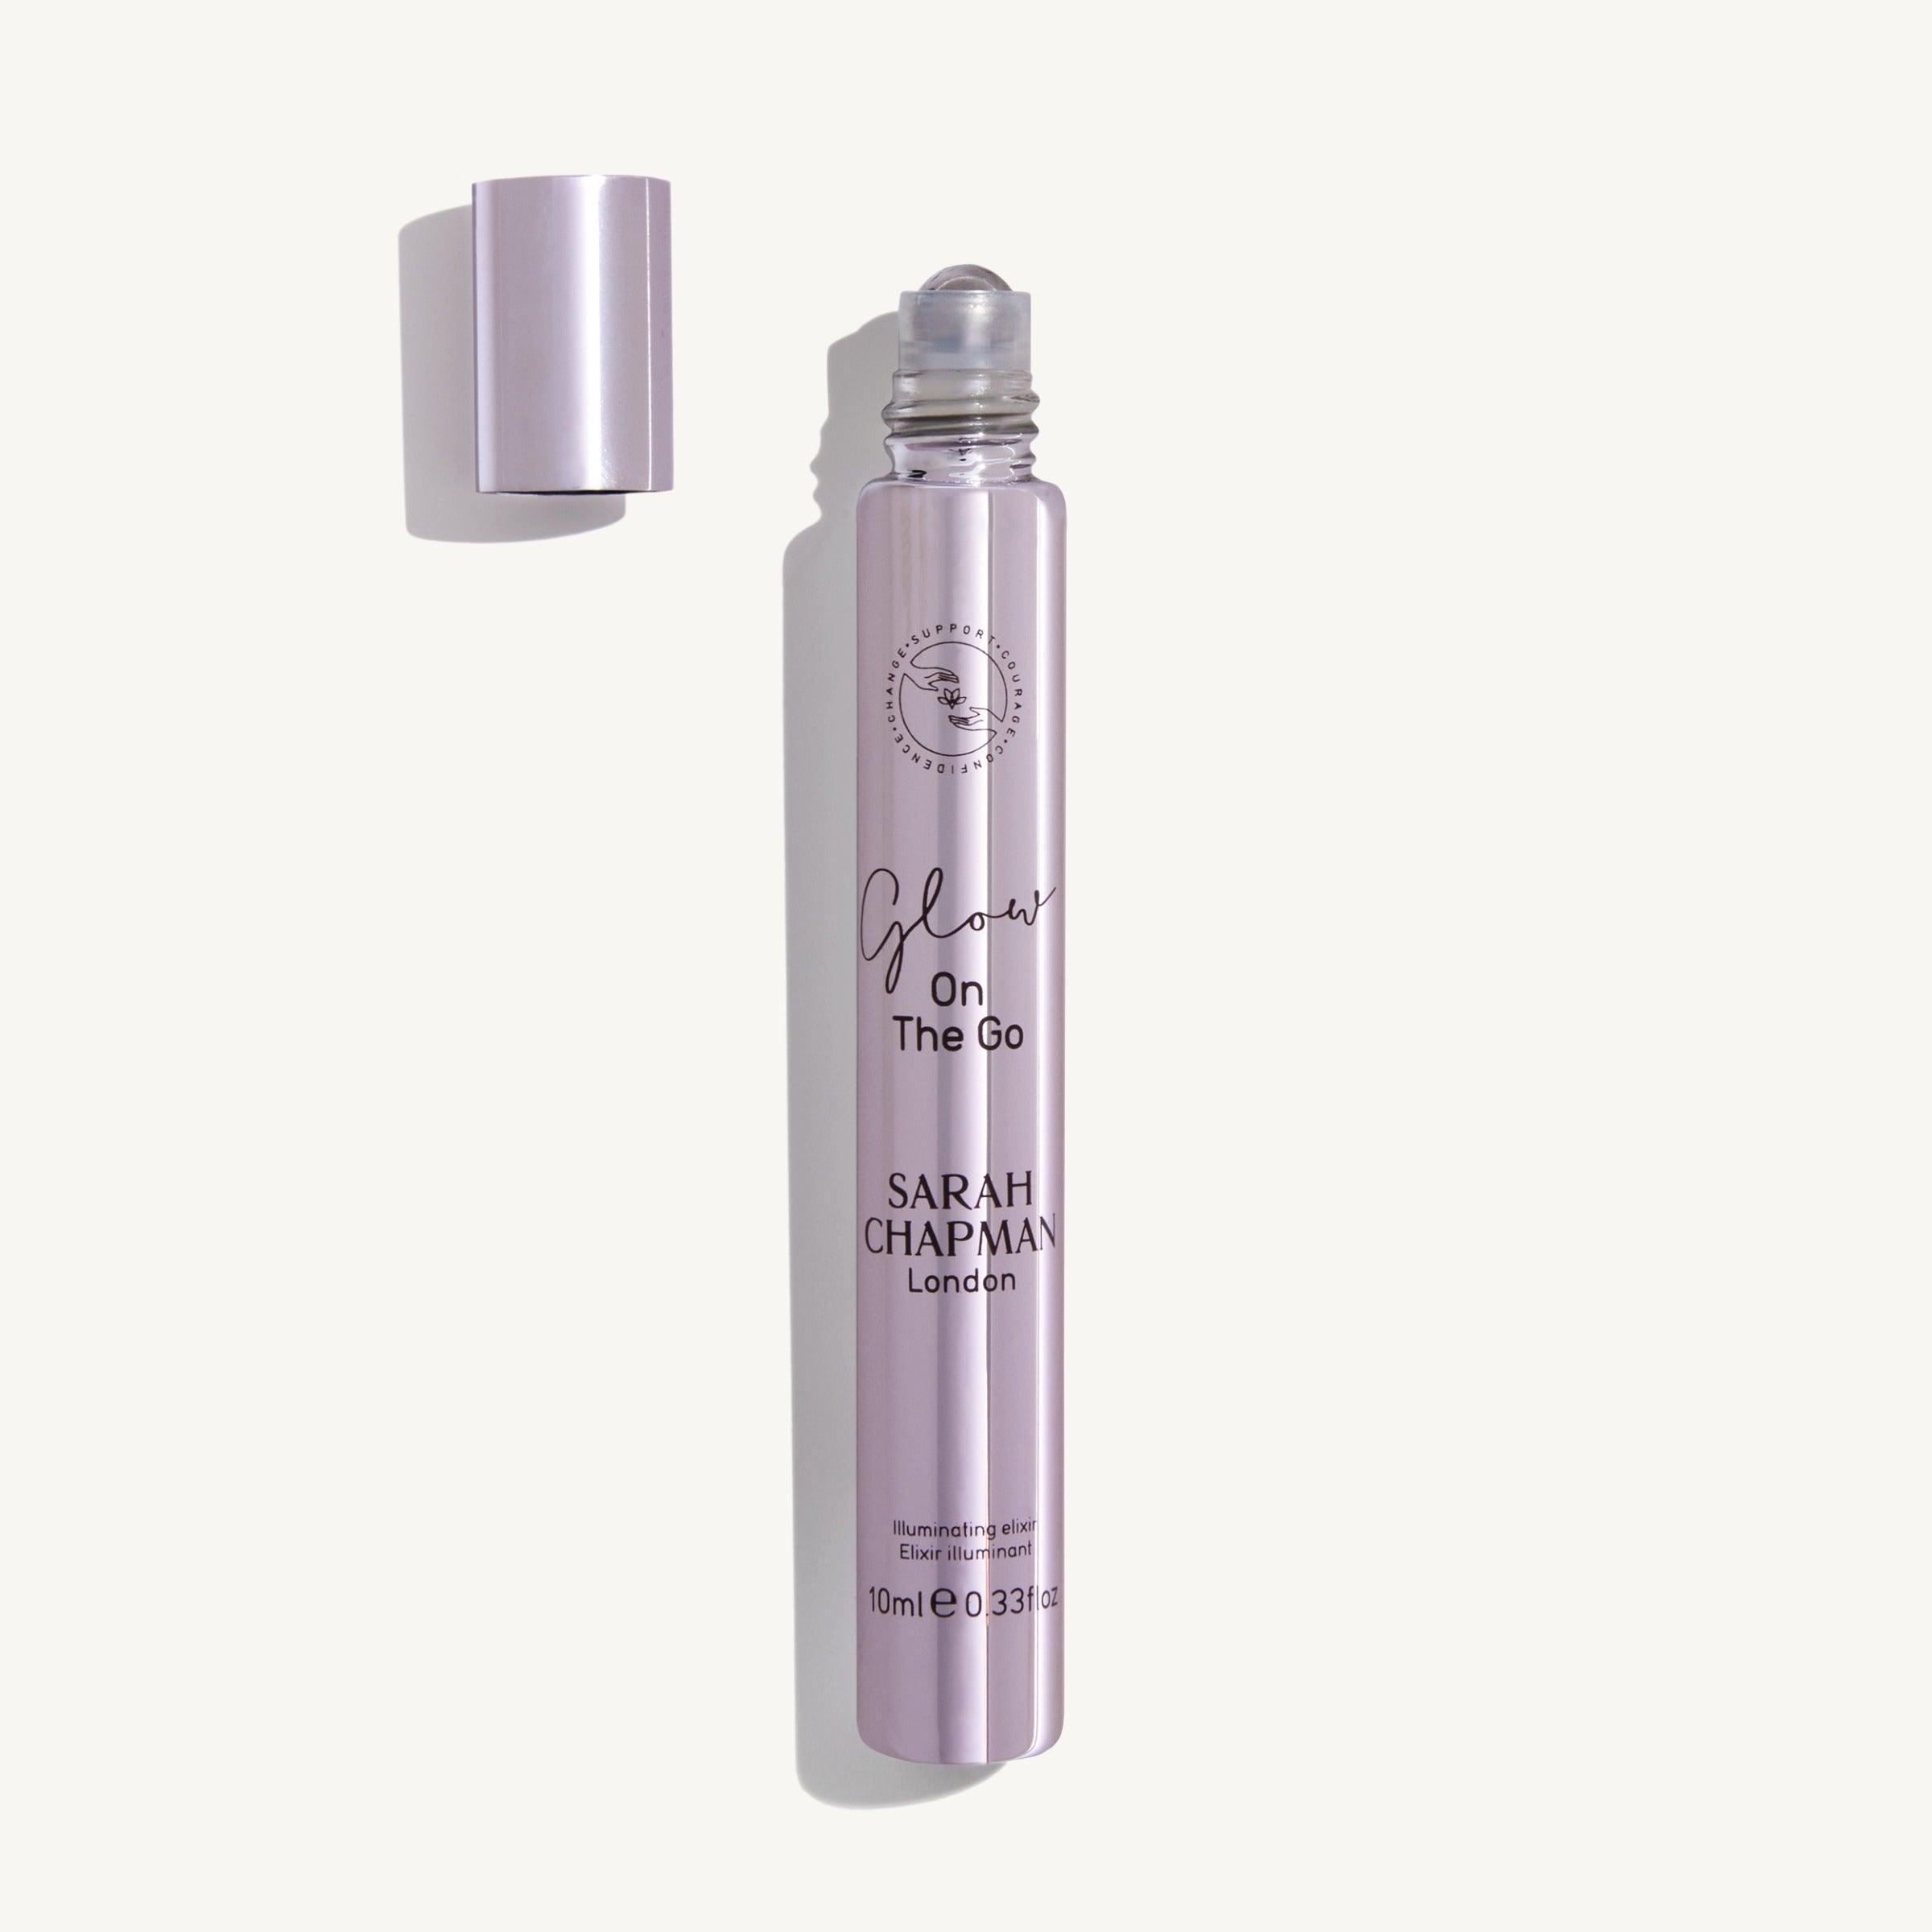 Glow On The Go 10ml facial oil with roller ball applicator